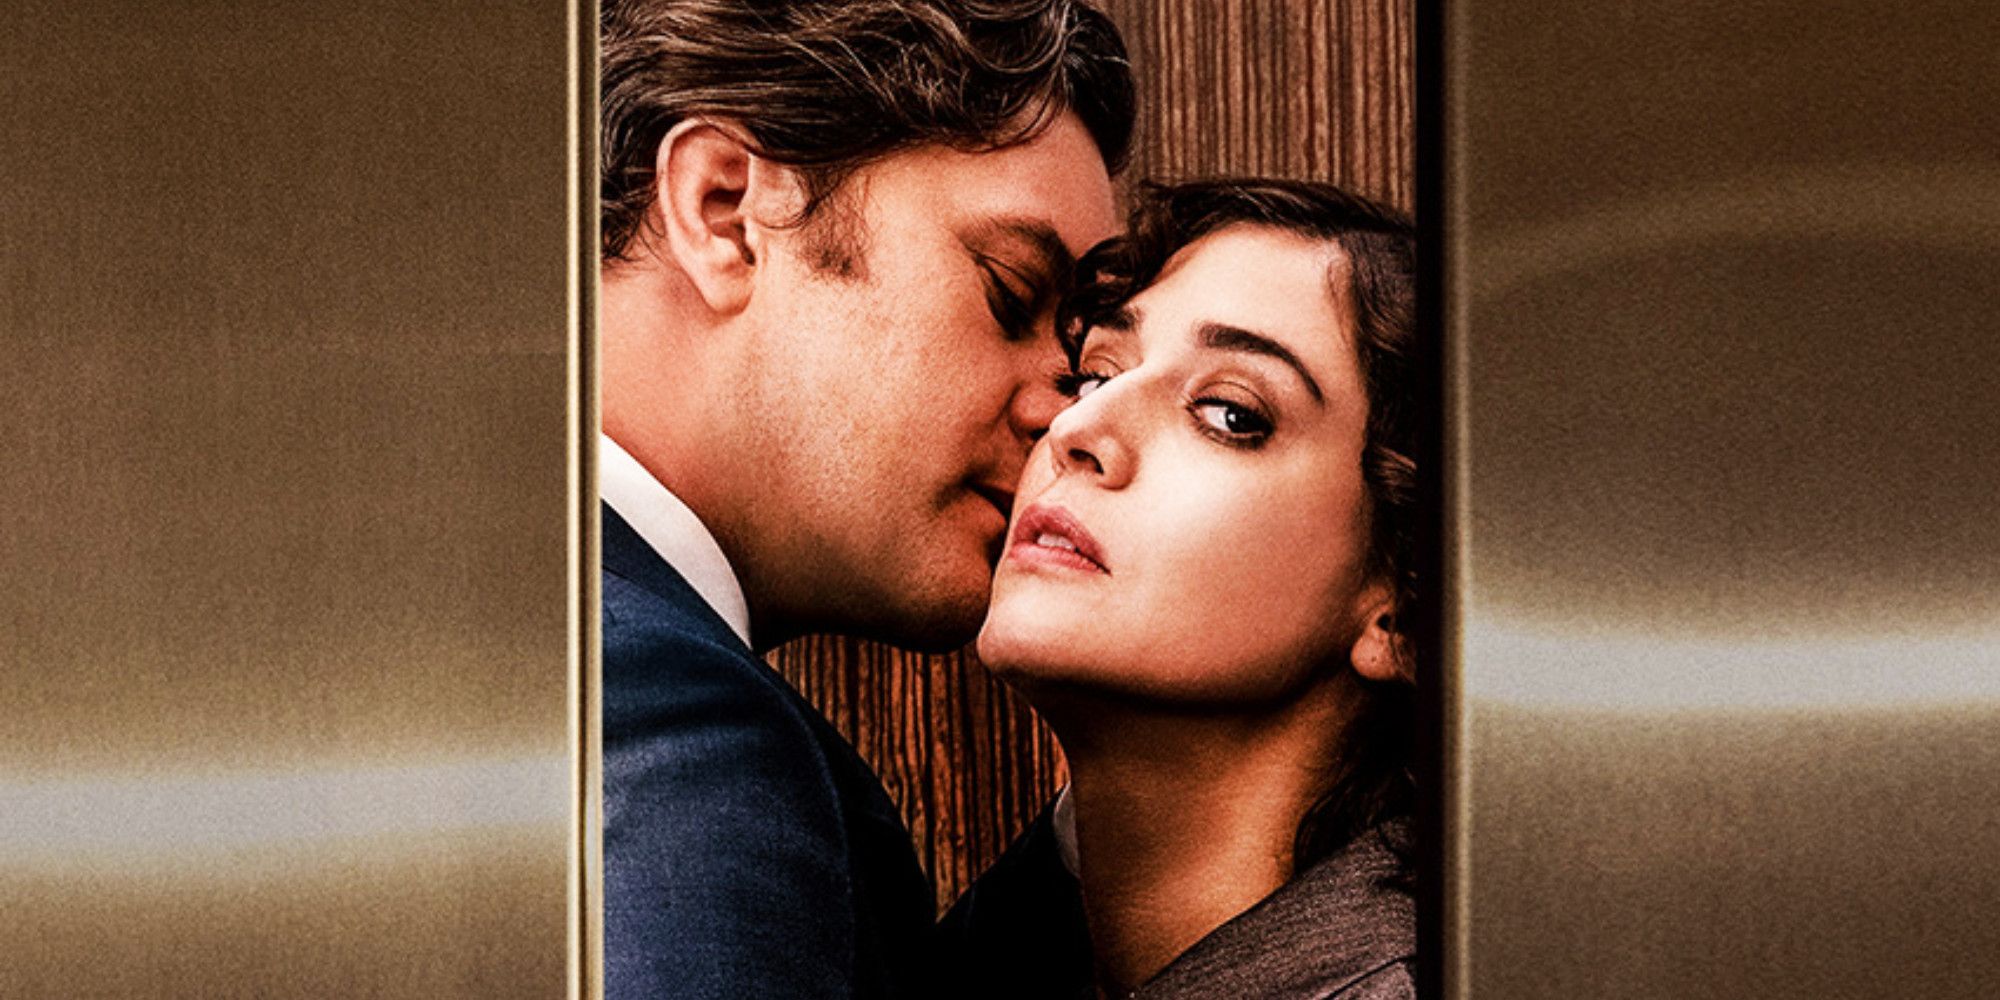 Joshua Jackson and Lizzy Caplan get steamy in Paramount+'s Fatal Attraction reboot